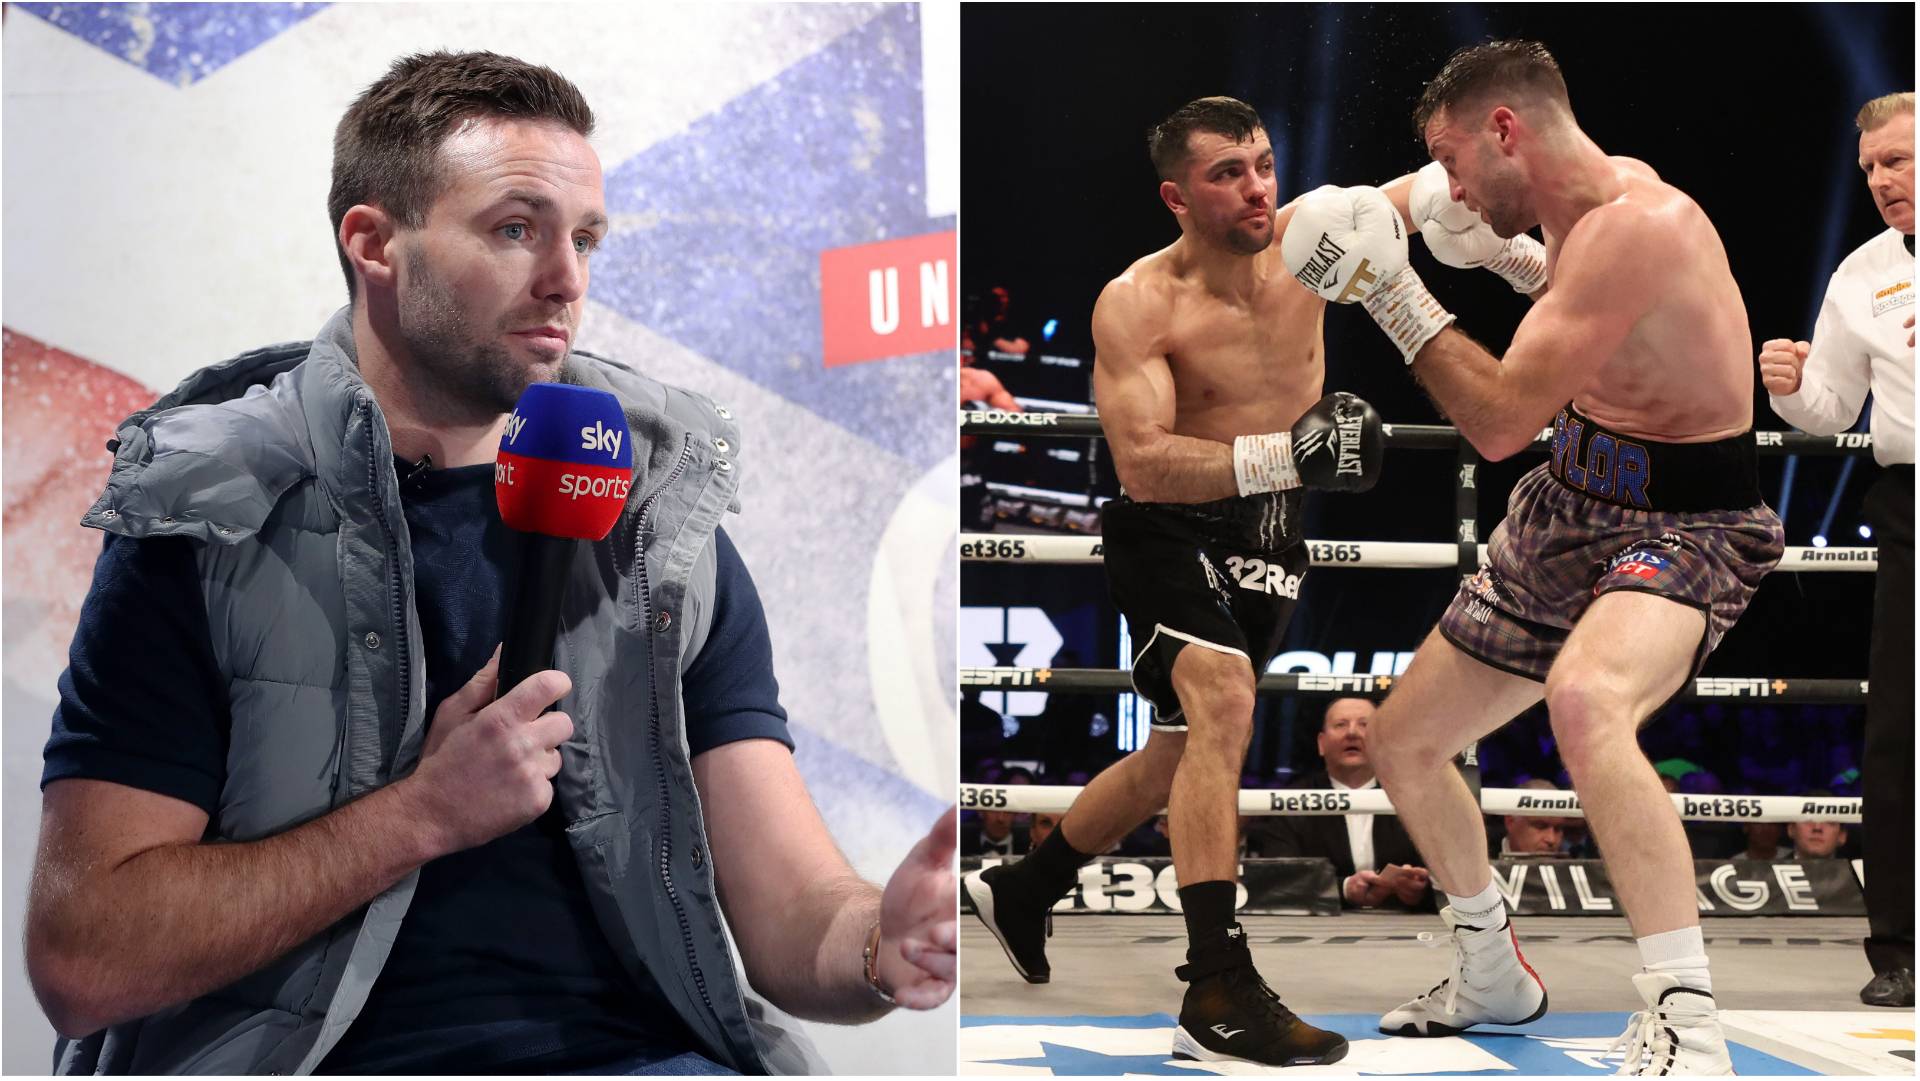 josh-taylor-jack-catterall-boxing-rematch-desperate